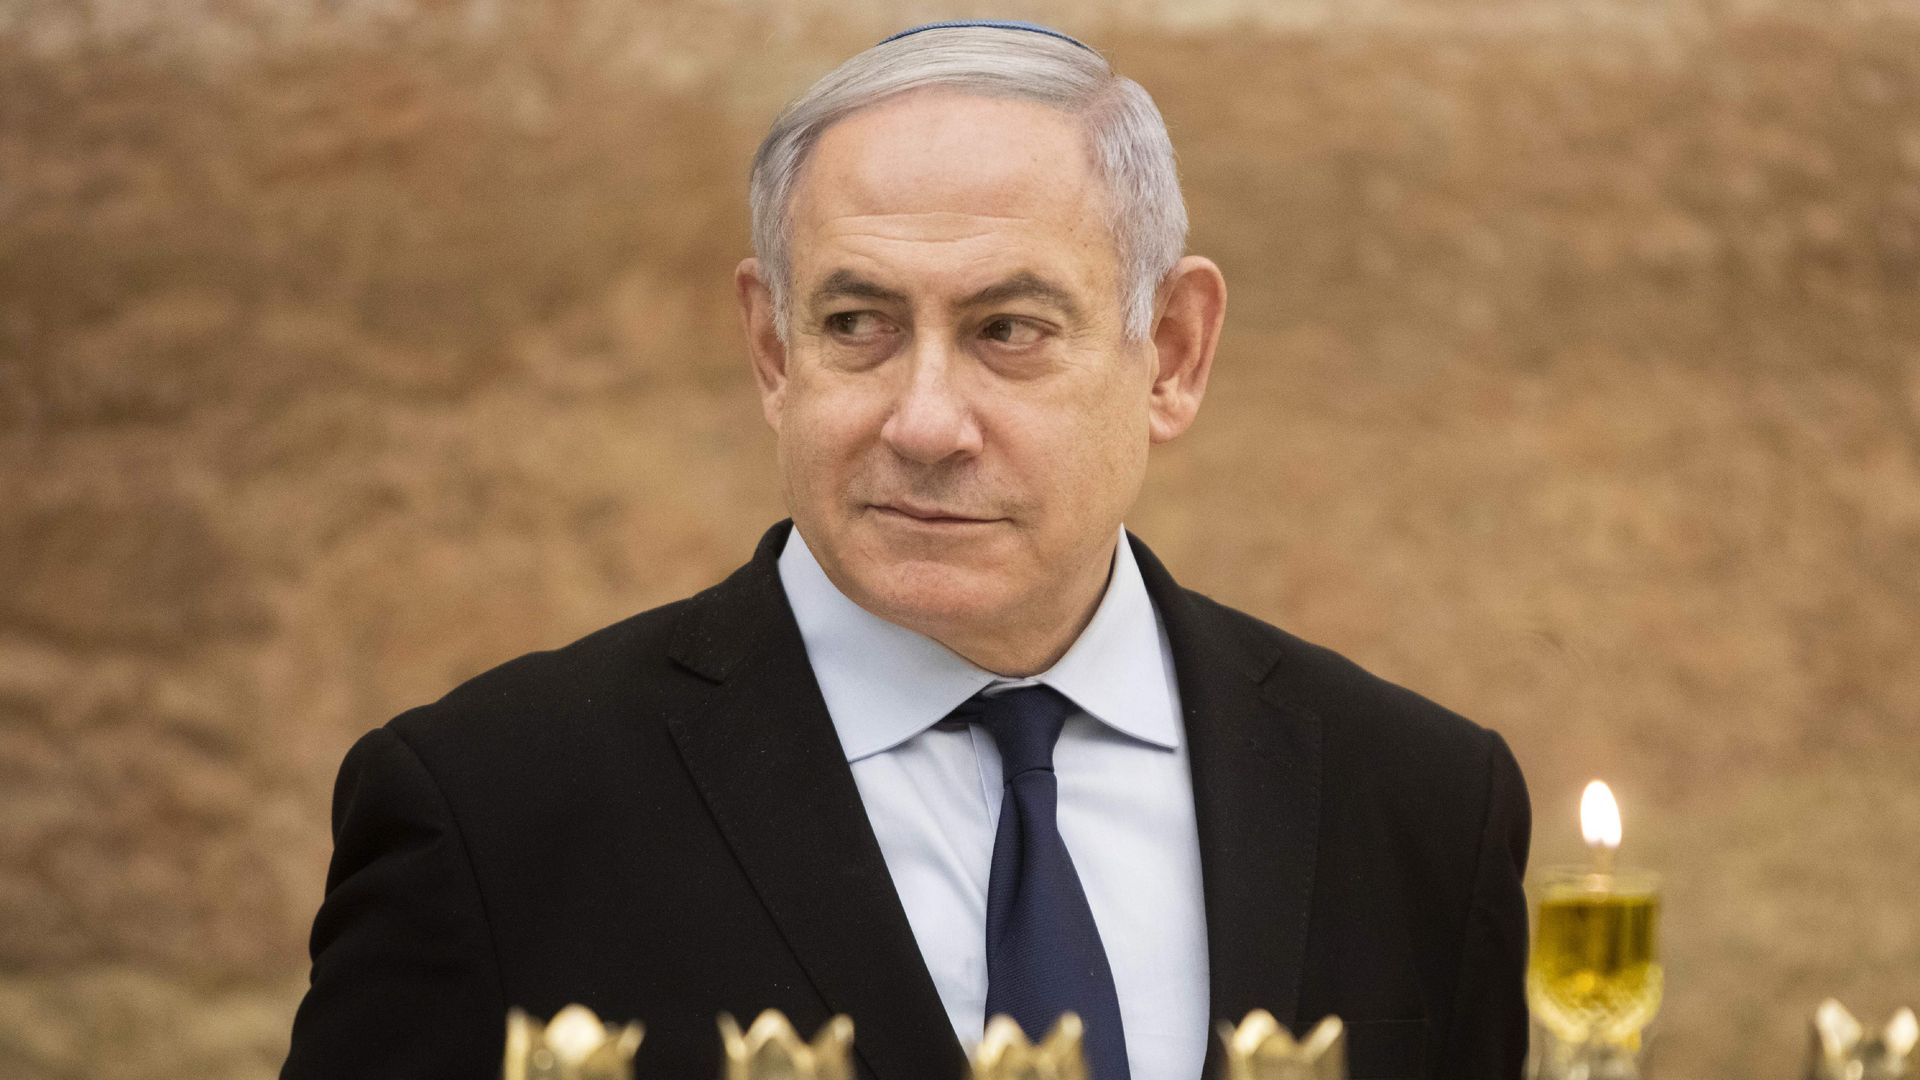 Israeli Prime Minister Benjamin Netanyahu looks on after lighting a Hanukkah candle at the Western Wall, Judaism's holiest prayer site, in the Old City of Jerusalem on December 22